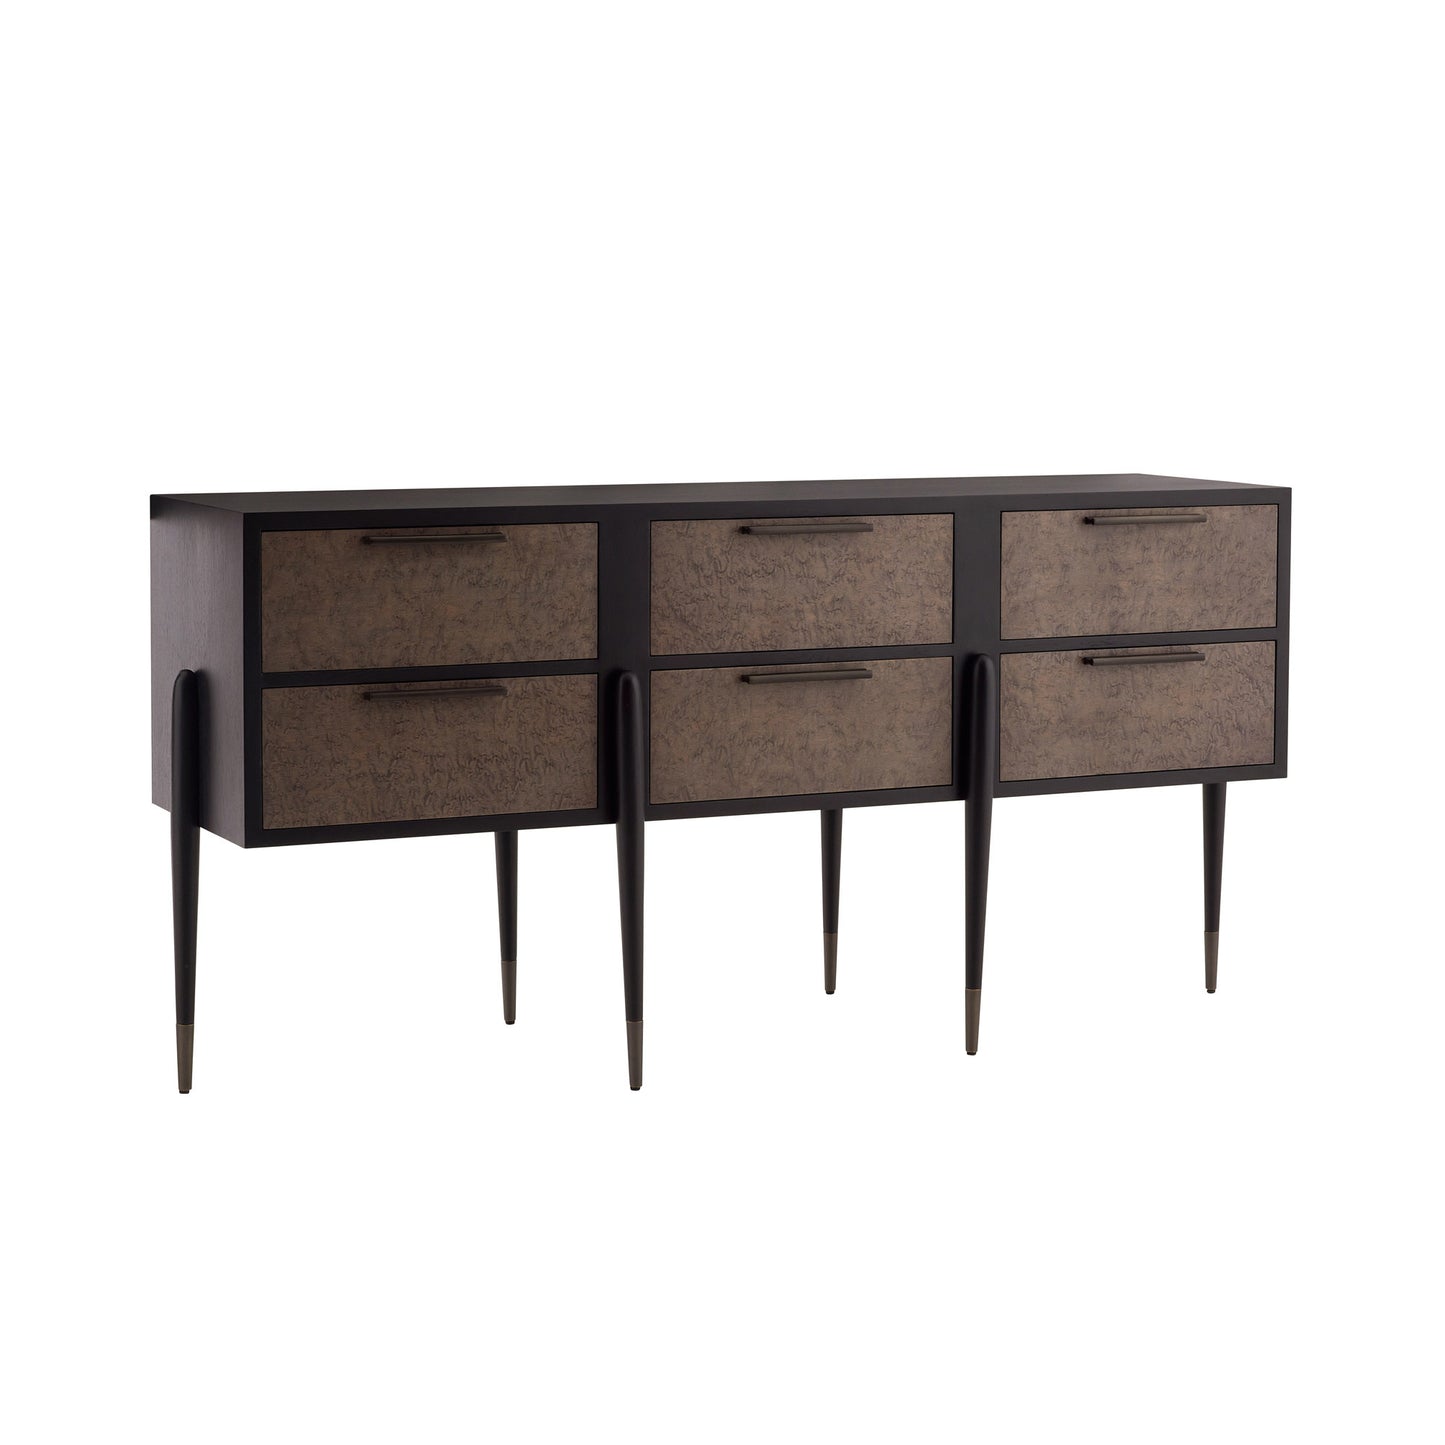 Moody Credenza - Vintage-Inspired Console with Armor Burl Veneer and Brass Accents